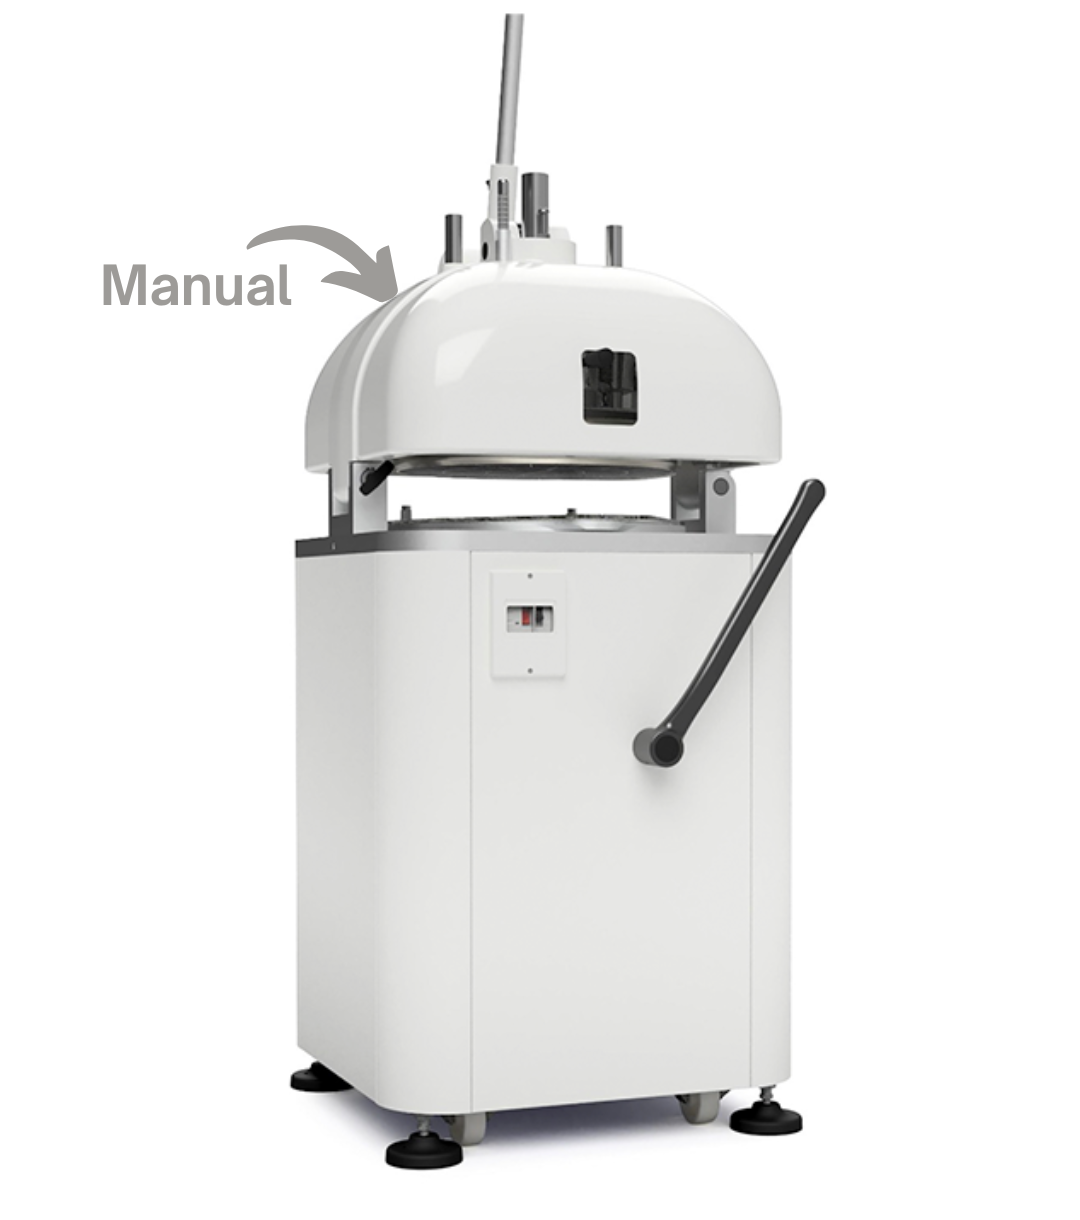 Vitella Manual Divider Rounder Machine with label that identifies it as Manual.